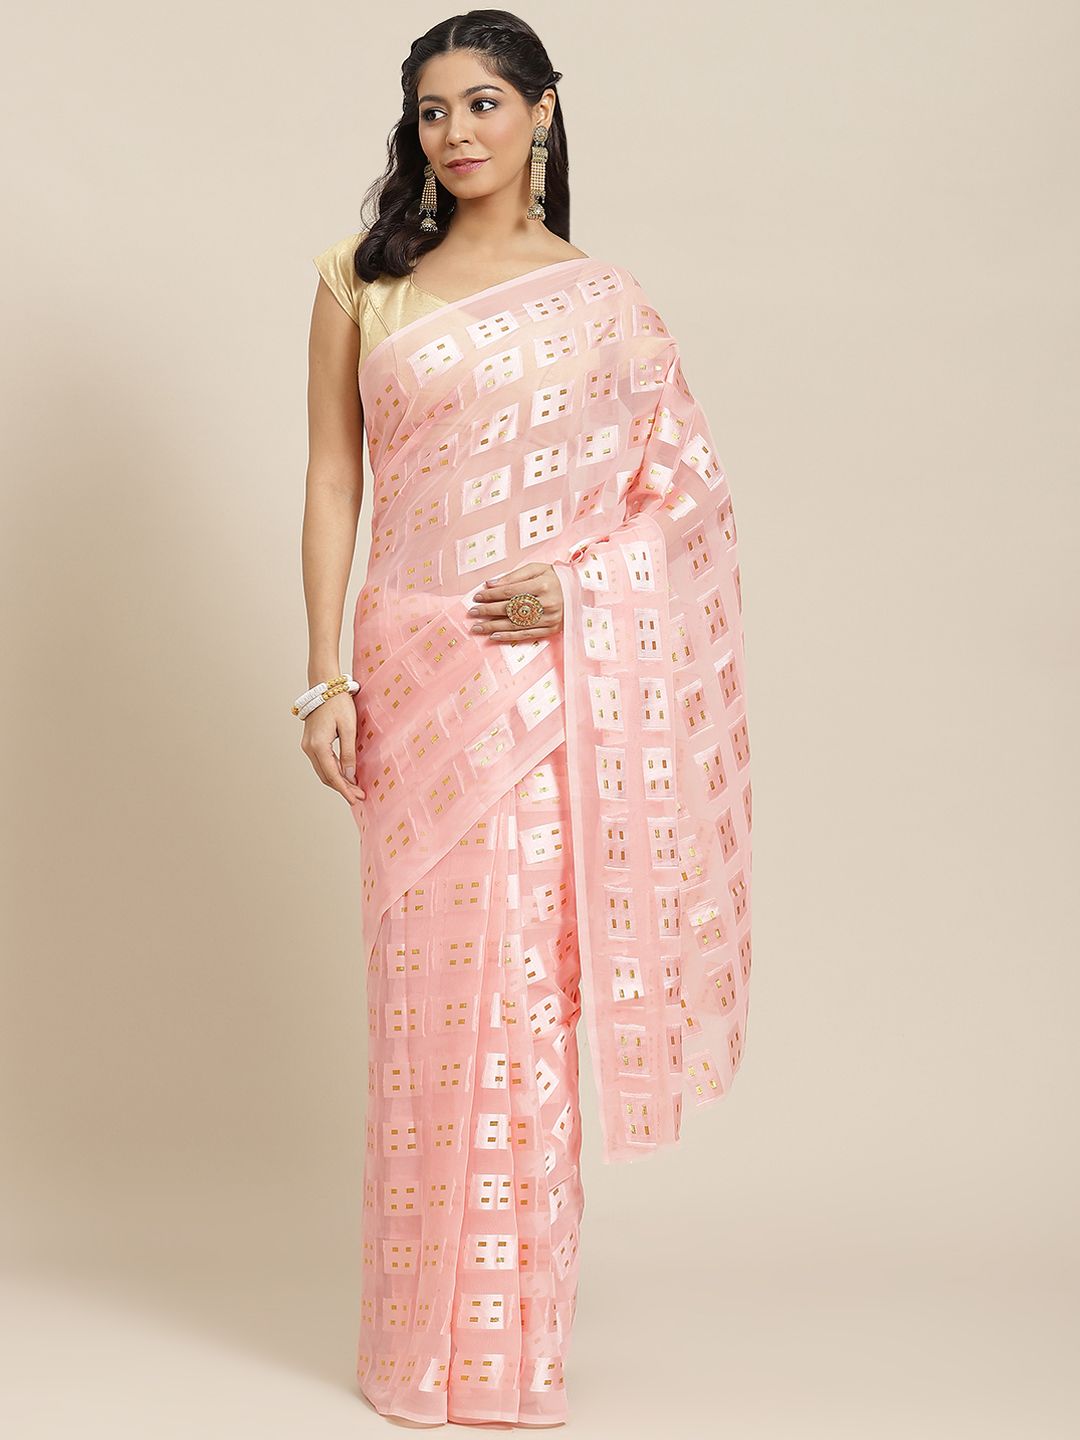 Ishin Pink & Golden Woven Design Poly Georgette Saree Price in India